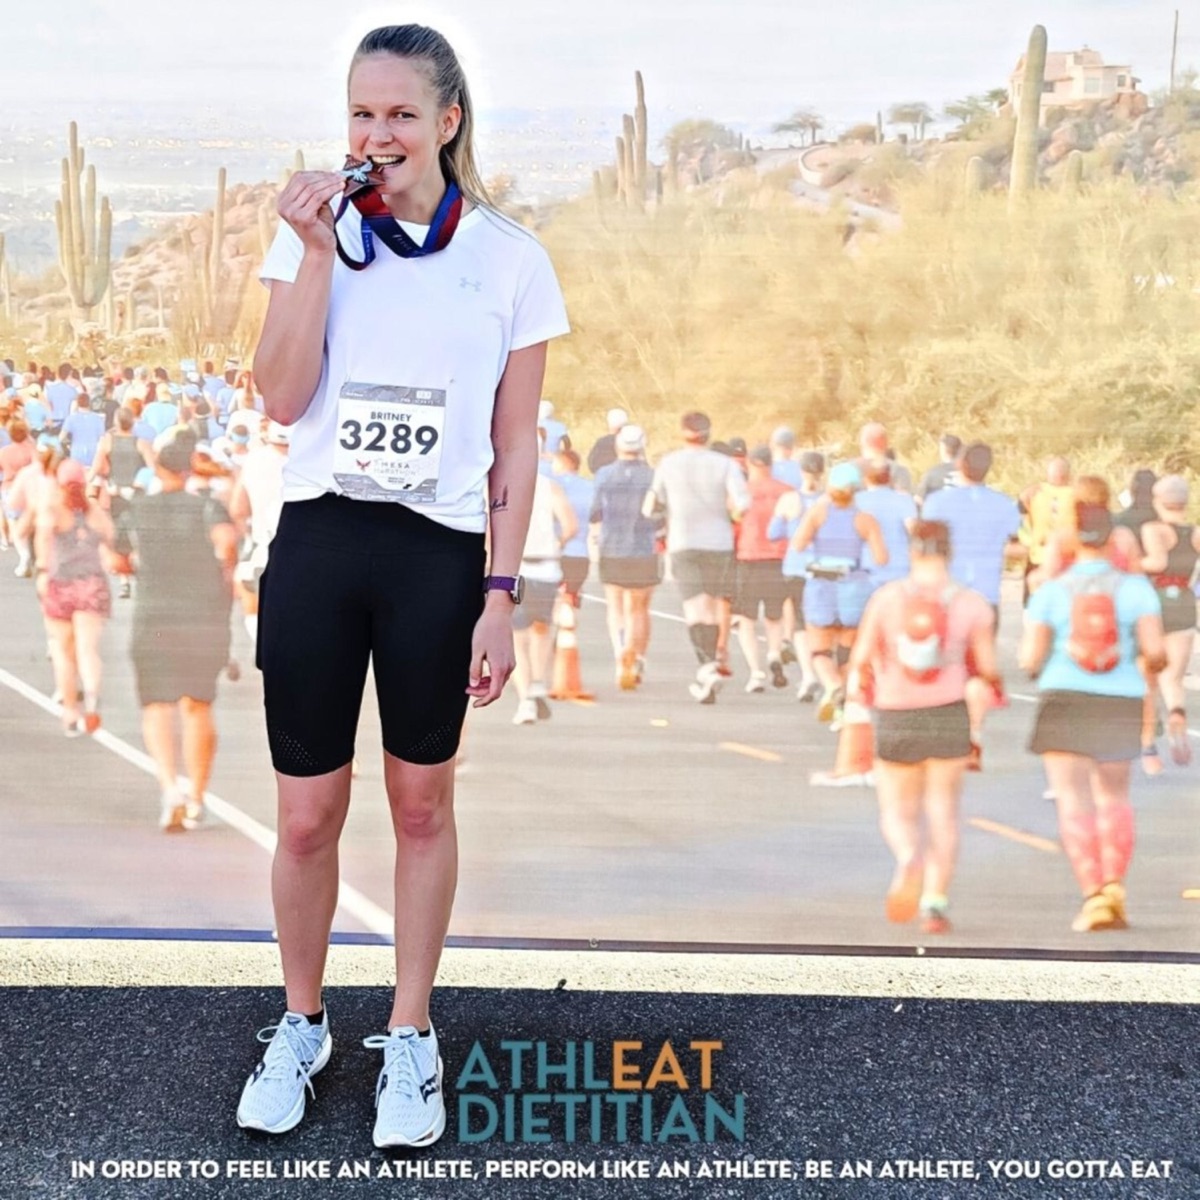 20. Marathon Nutrition Tips: 10 things to know for your first marathon  (PART 2) – Marathon Fueling